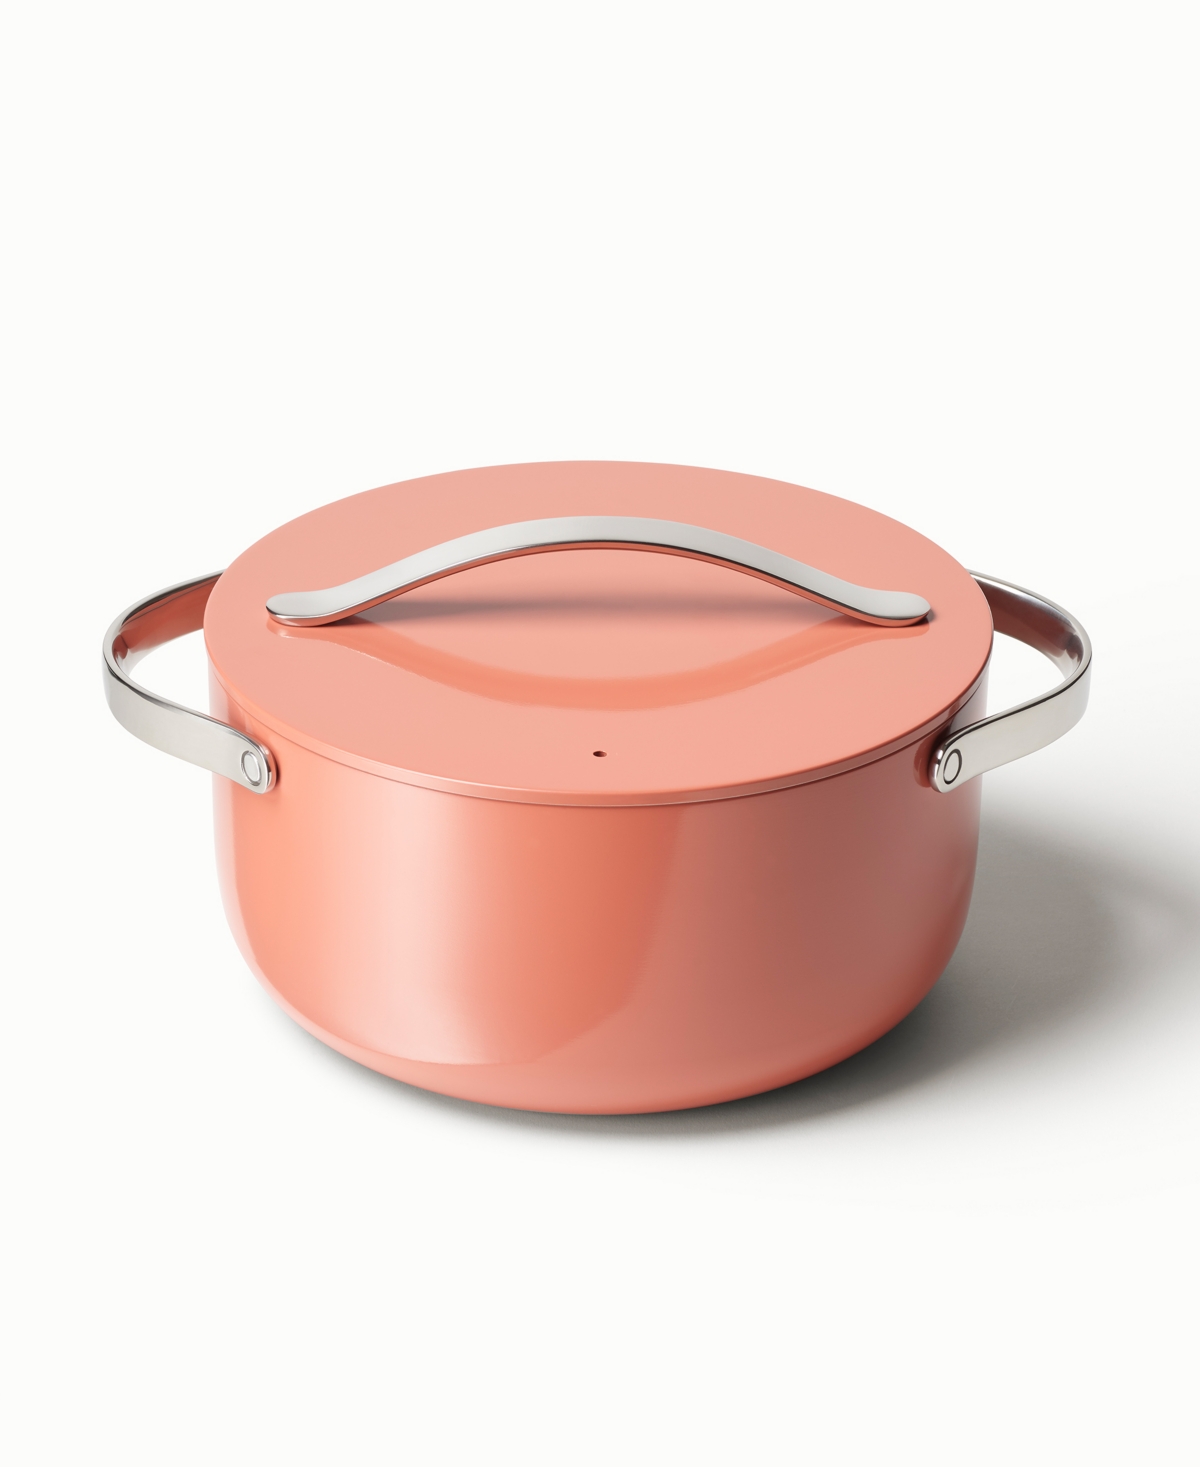 Caraway Ceramic 6.5 Qt Dutch Oven With Lid In Marigold